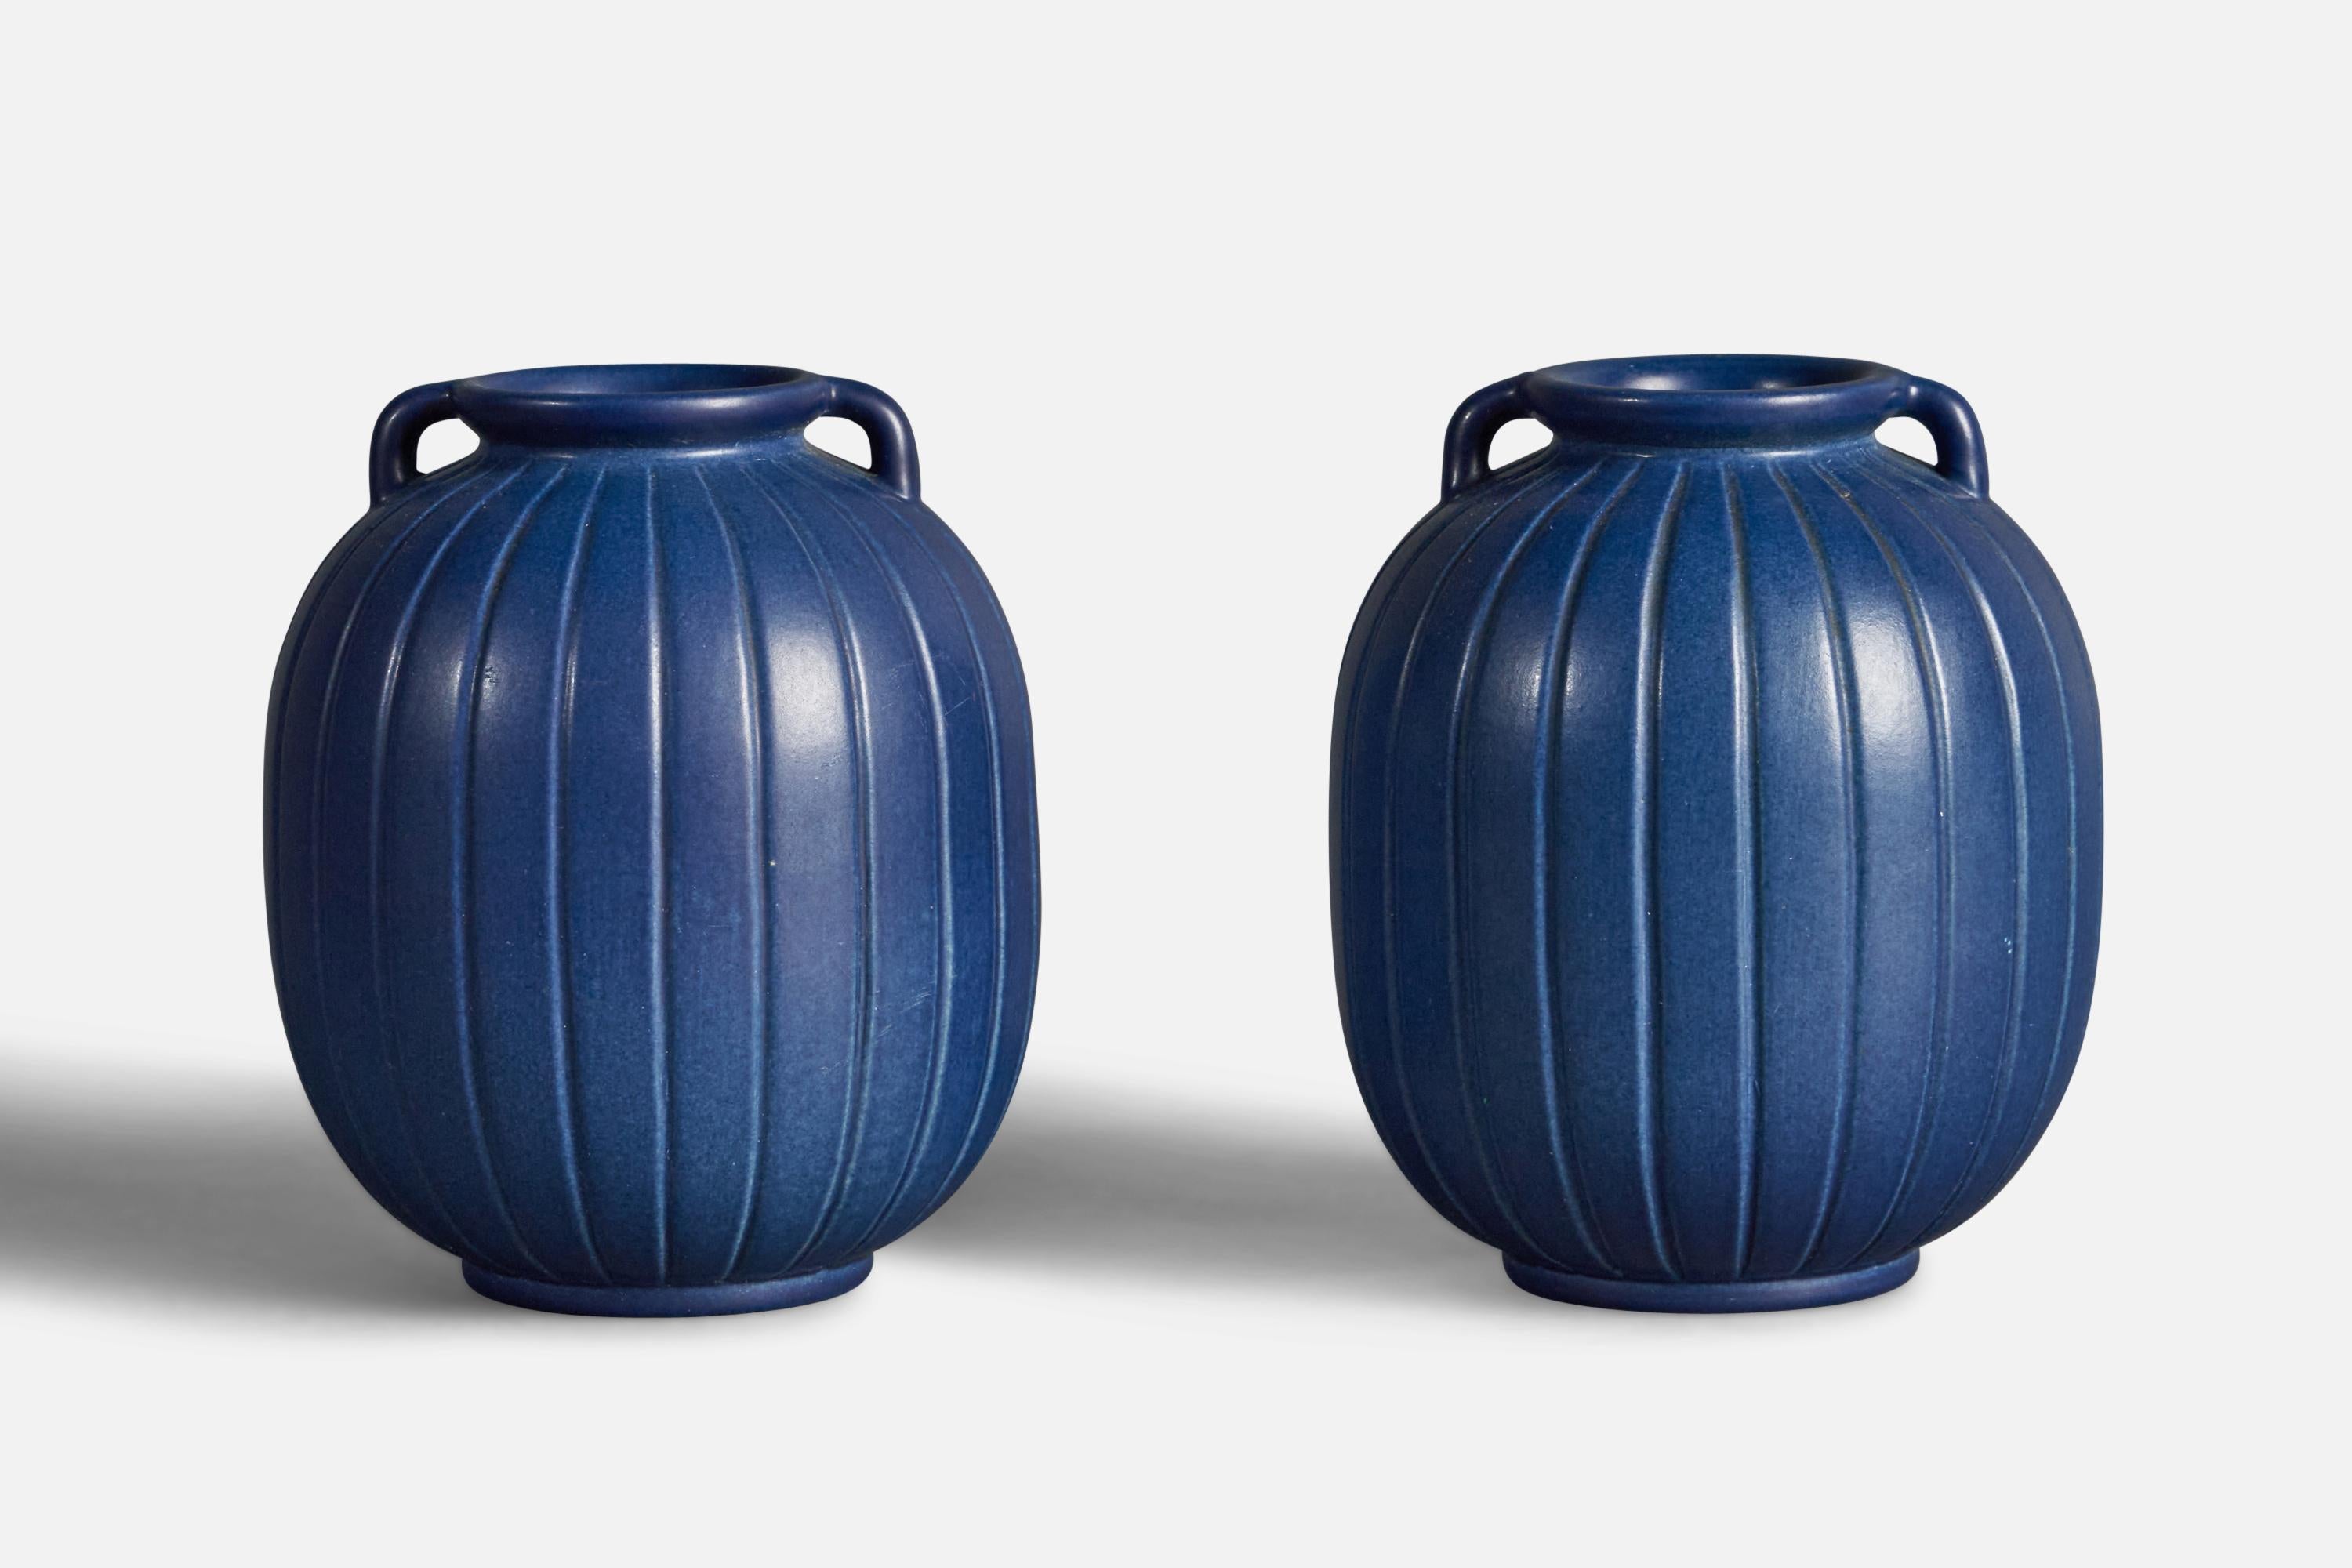 A pair of blue-glazed and fluted stoneware vases designed and produced by Peter Ipsens Enke, Denmark, 1940s.